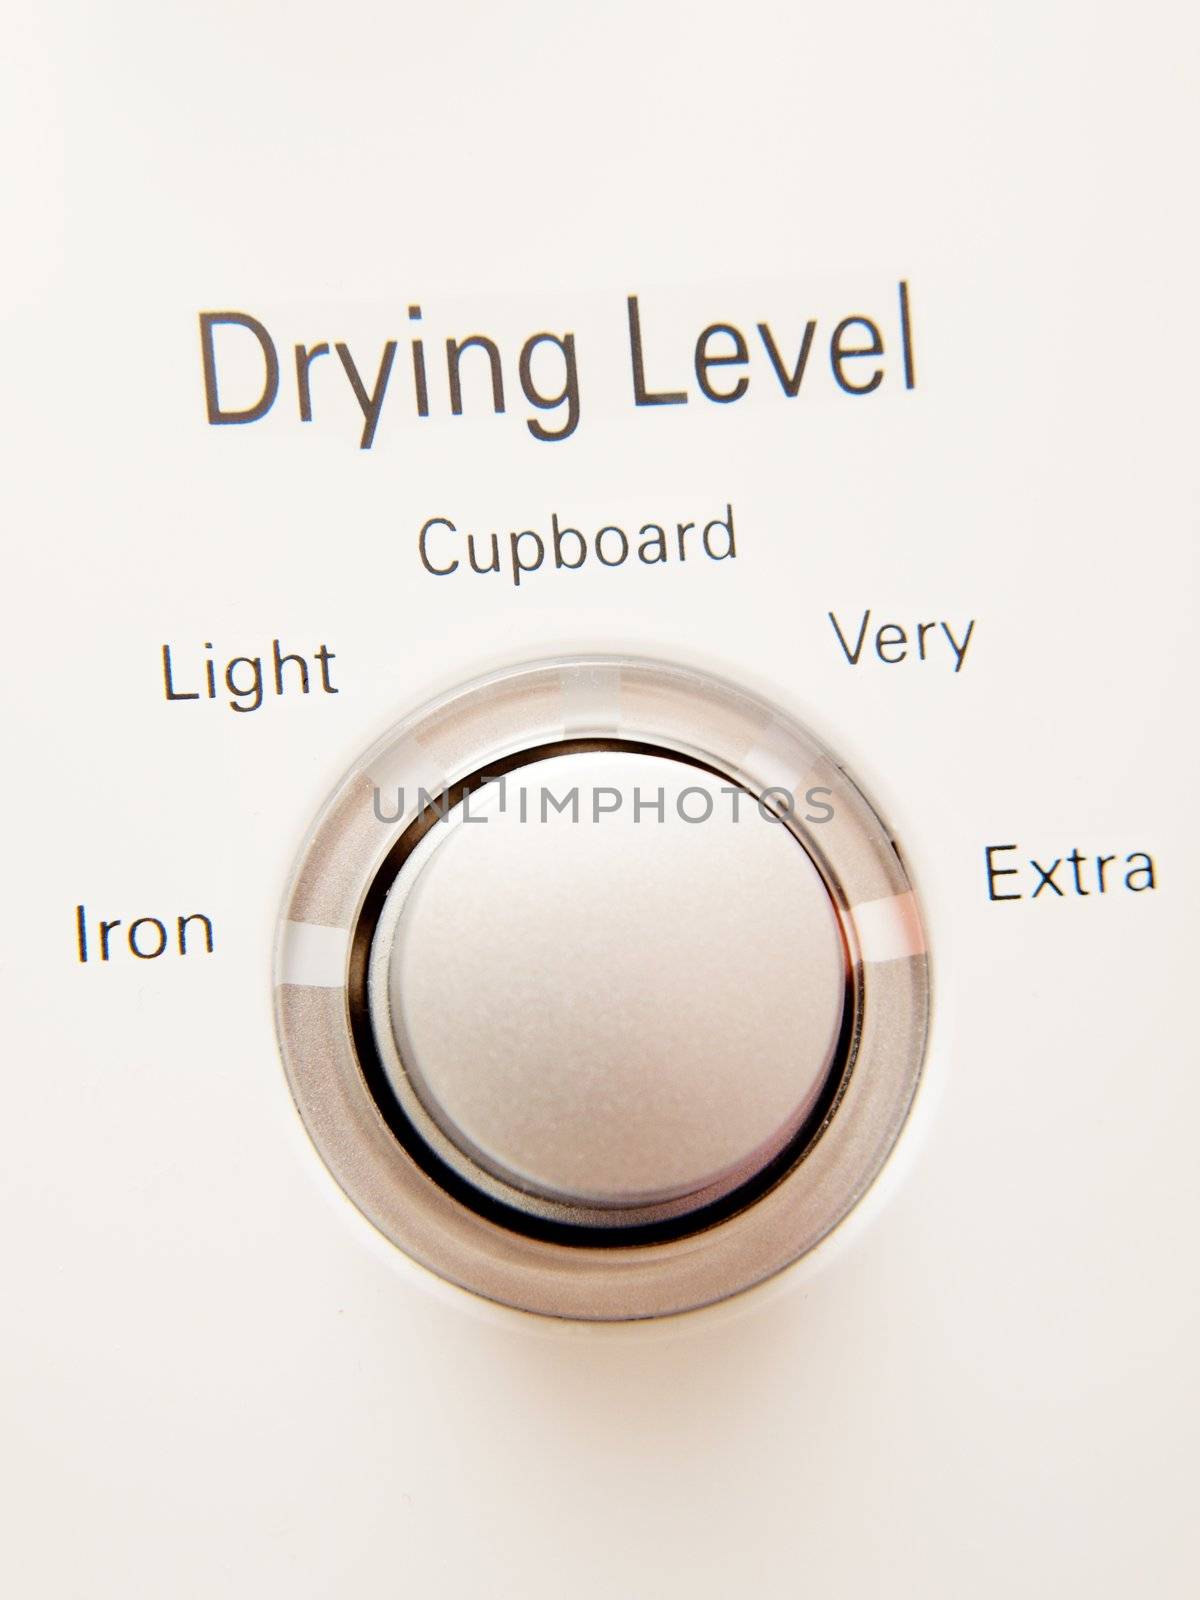 Program button with selections on a dryer machine